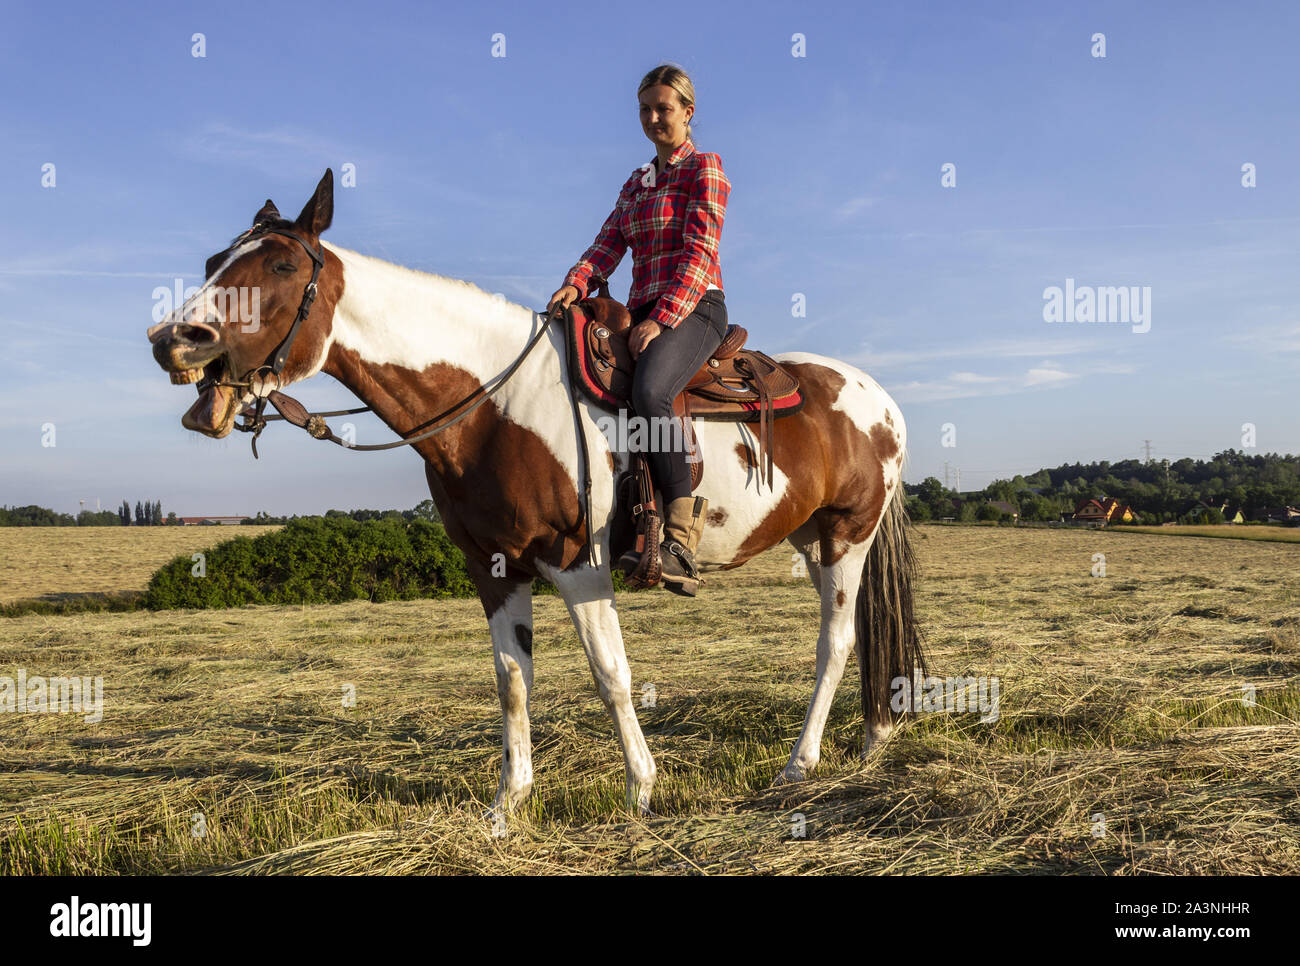 A young girl rides a horse on a pasture near a ranch and laughing horse Stock Photo